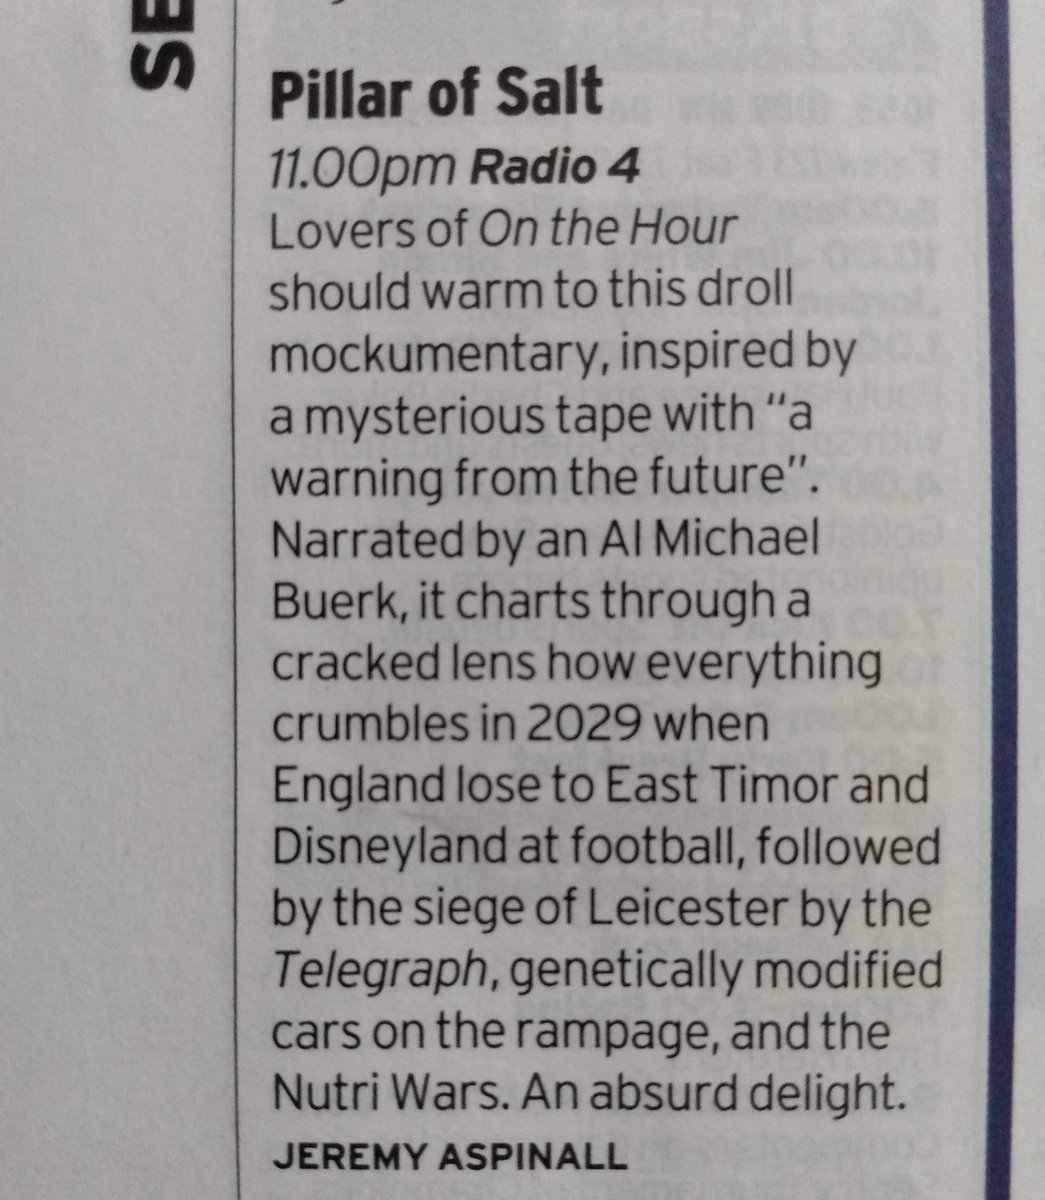 Rub your ears on #PillarOfSalt tonight on @BBCRadio4 for an exclusive preview of humanity's frightening, flavourful, football-filled descent into oblivion. It's like Endgame but with fewer dustbins and more Jeremy Vine. Enjoy. And don't say you weren't warned.